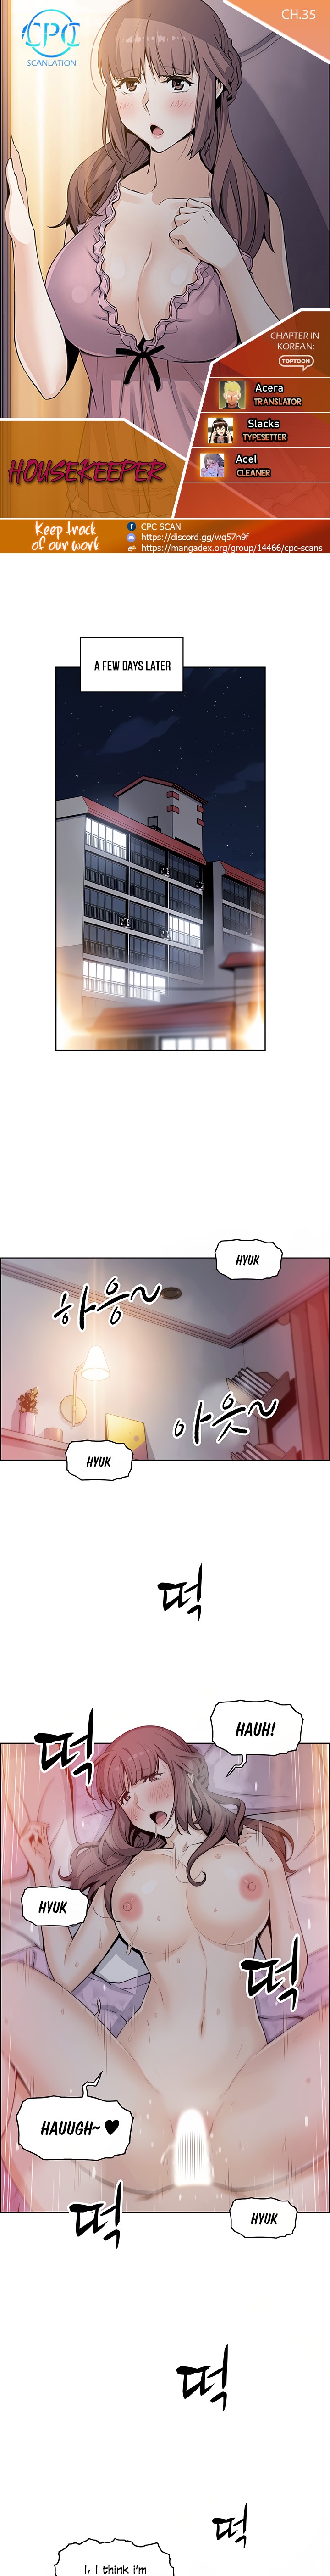 Housekeeper Manhwa - Chapter 35 Page 1